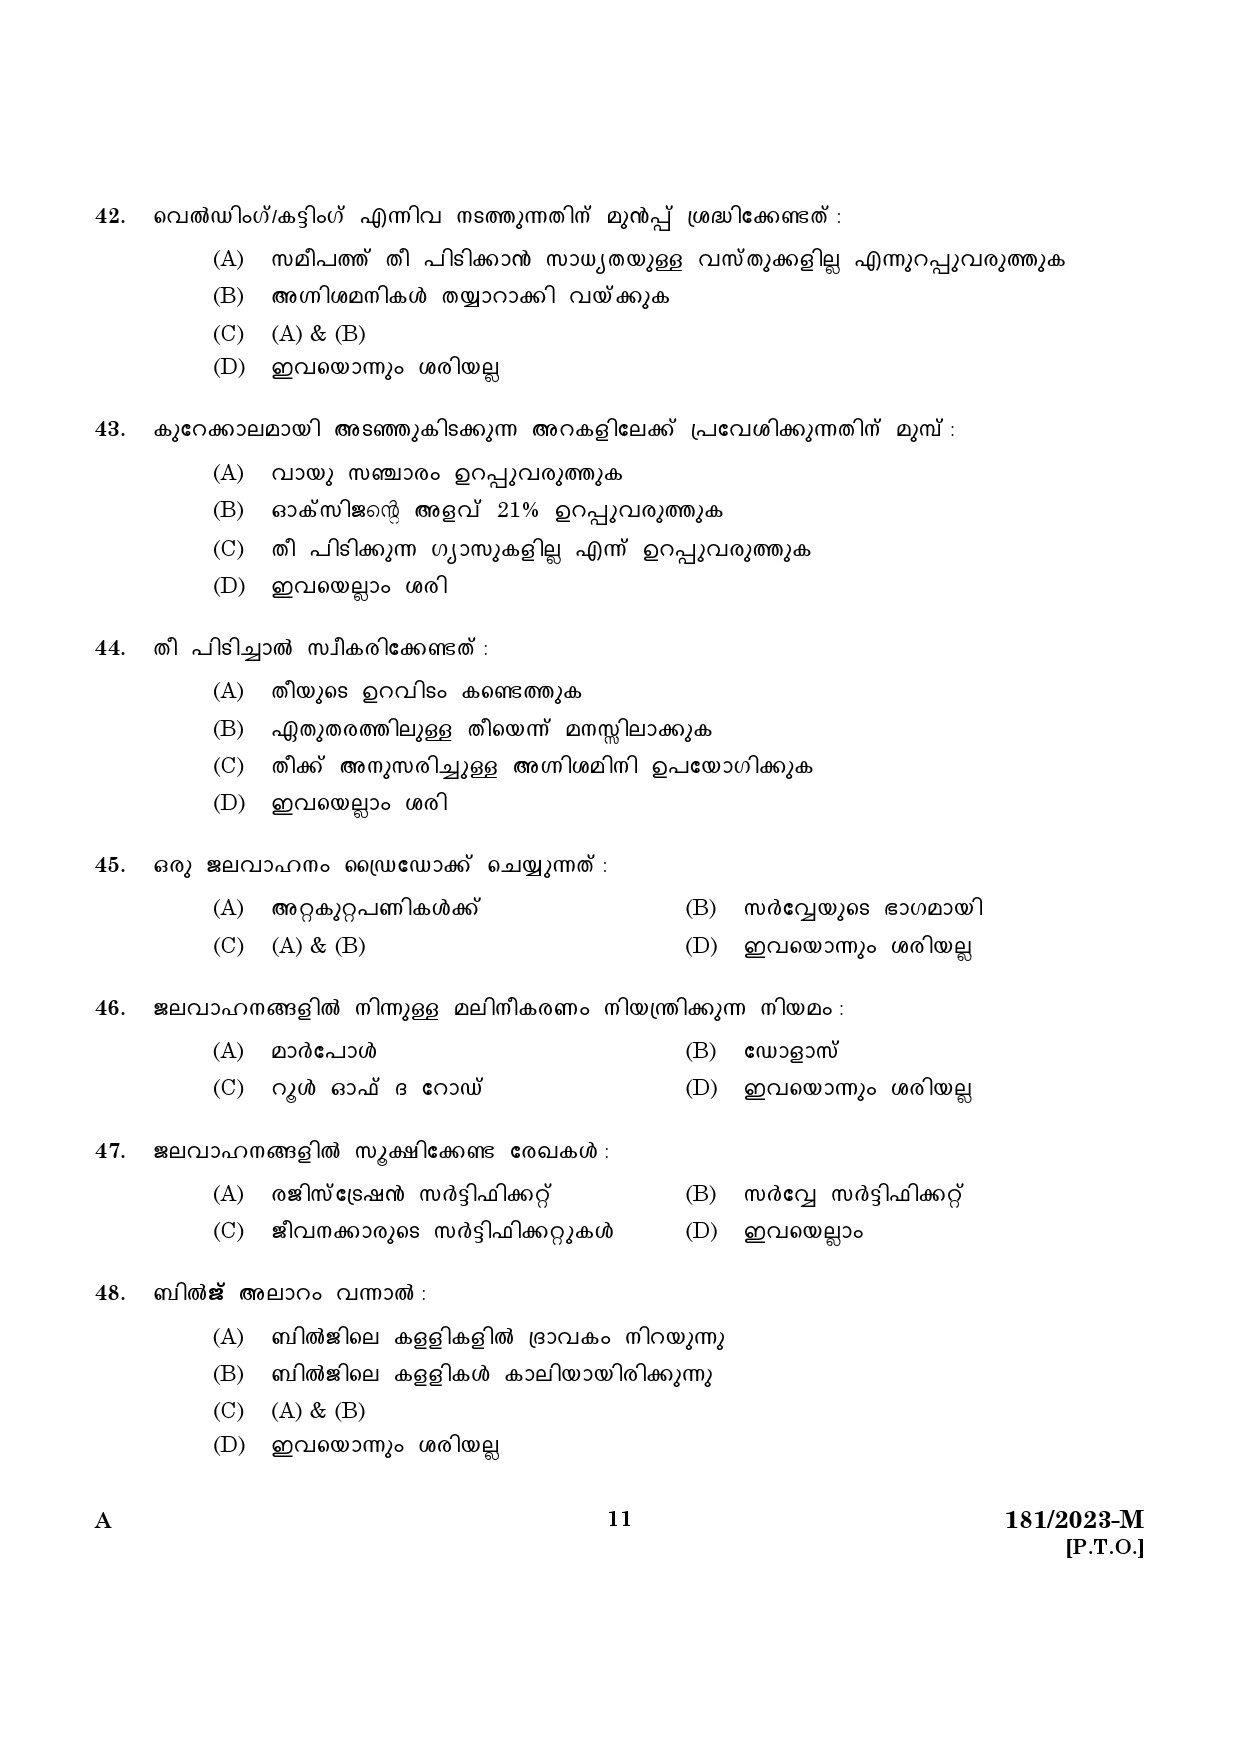 KPSC Forest Boat Driver Malayalam Exam 2023 Code 1812023 M 9